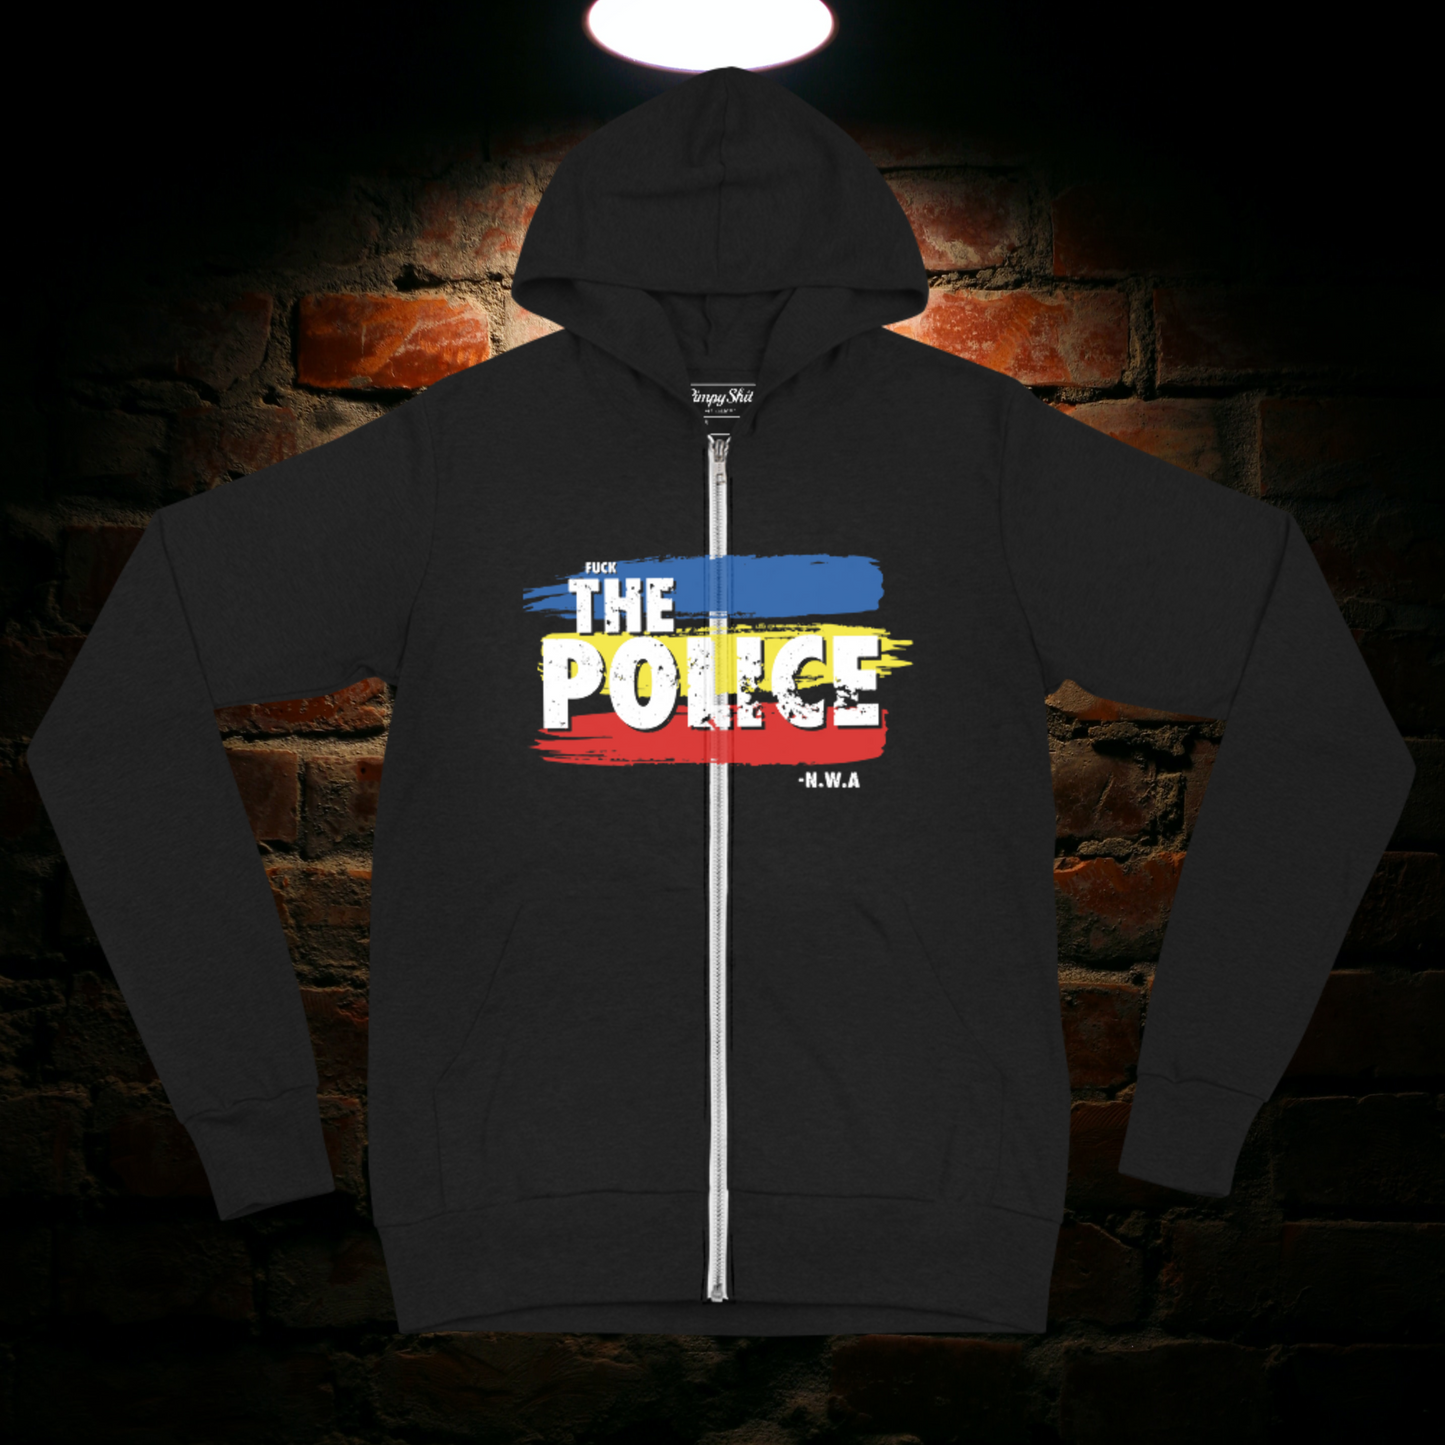 Fuck The Police! -NWA Hoody (Unzip to go Undercover)